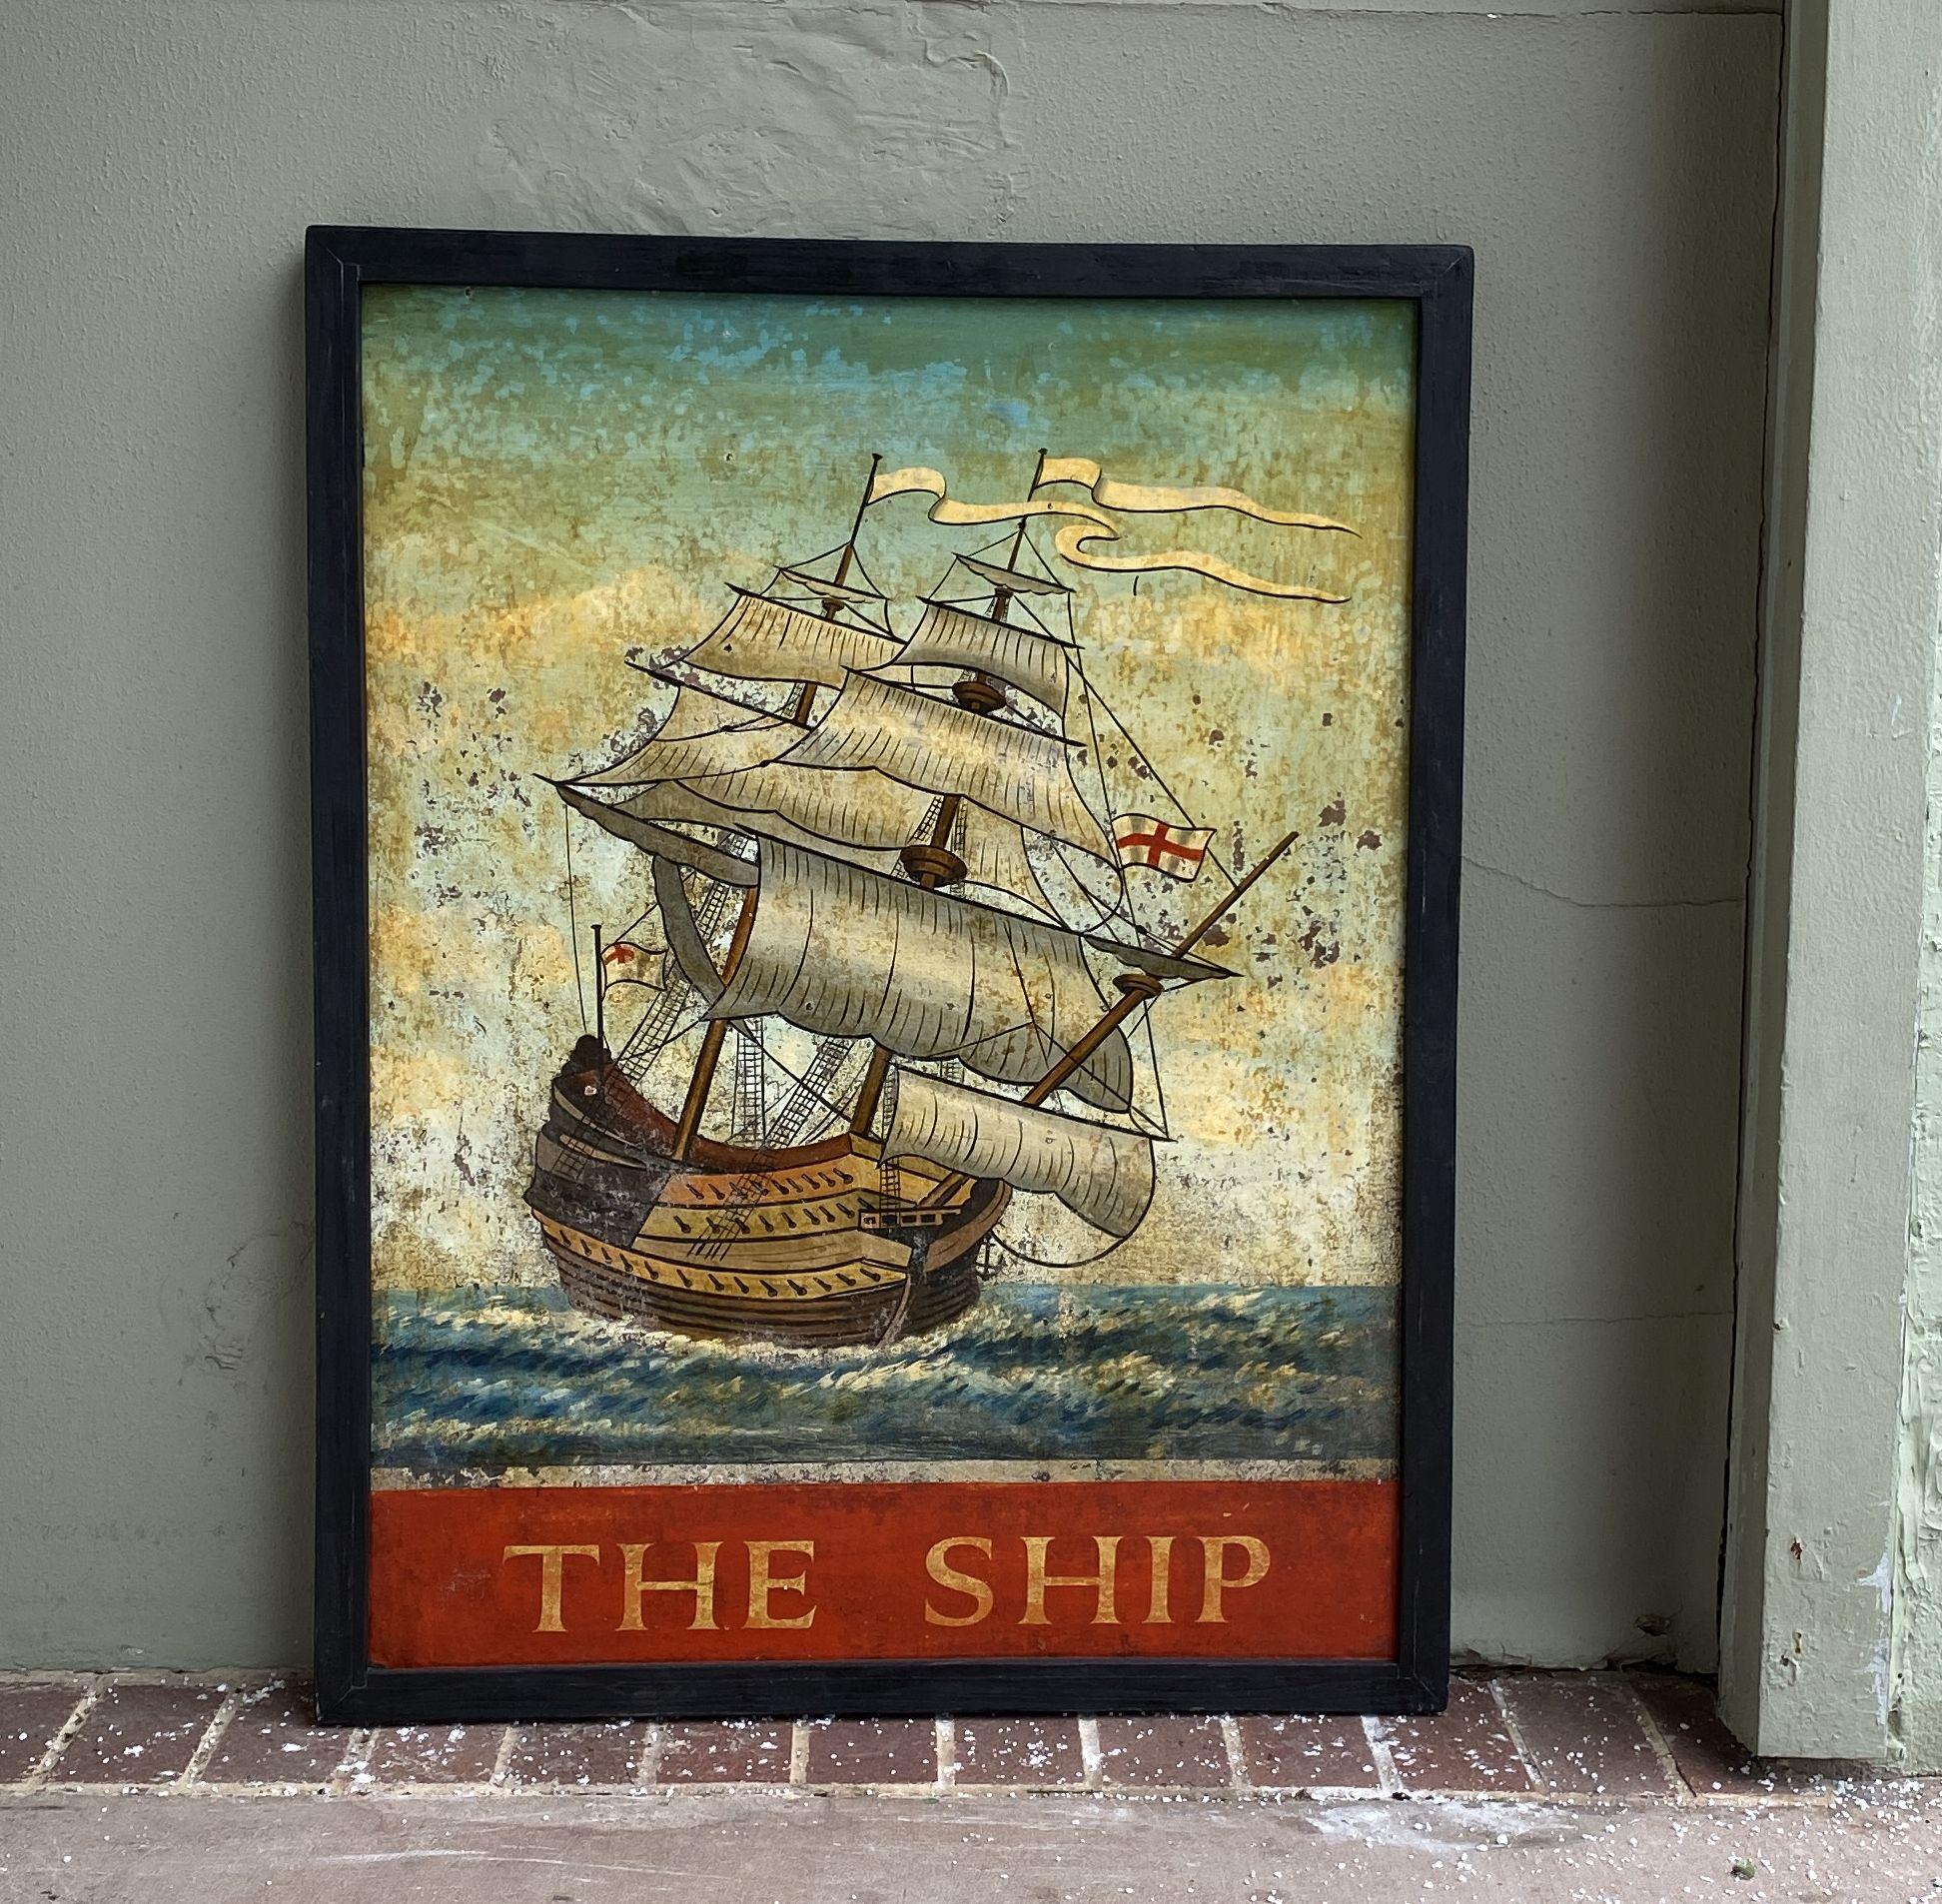 An authentic English pub sign (one-sided) featuring a painting of a British brigantine or two-mast sailing ship featuring flags with St. George's cross, entitled: The Ship.

A very fine example of vintage advertising artwork, ready for display.

